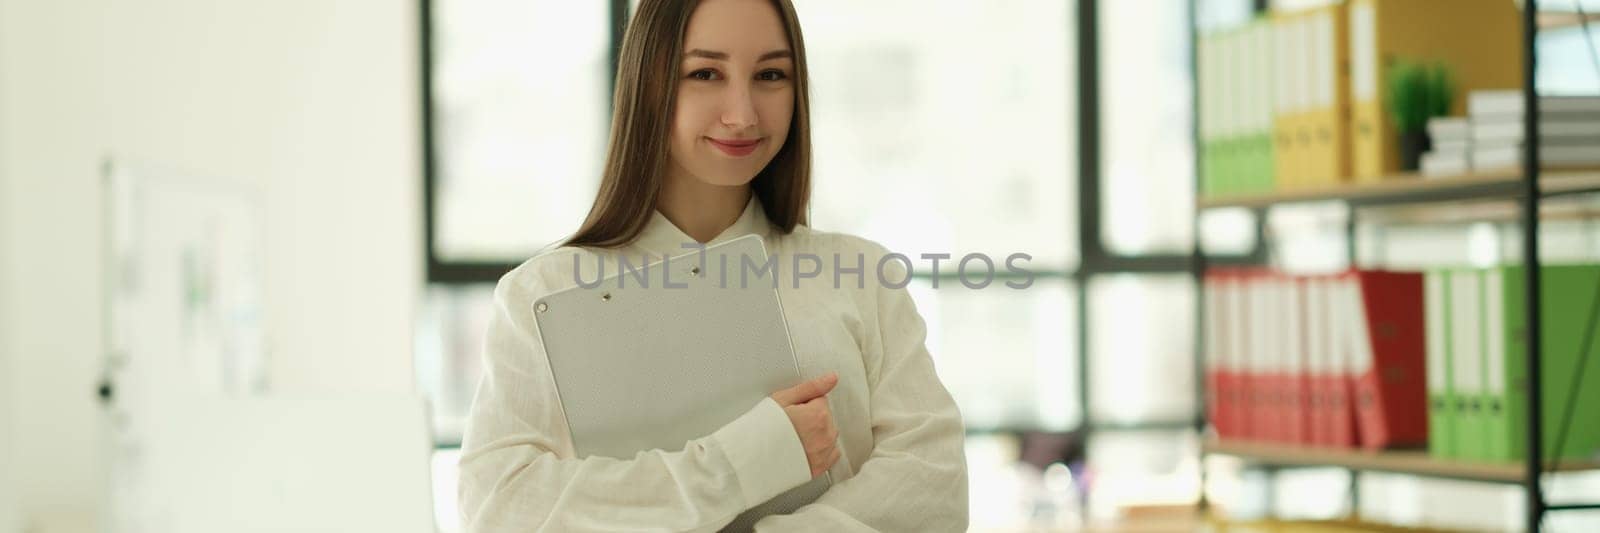 Woman manager with clipboard in hands in office portrait. Professional career growth in business concept